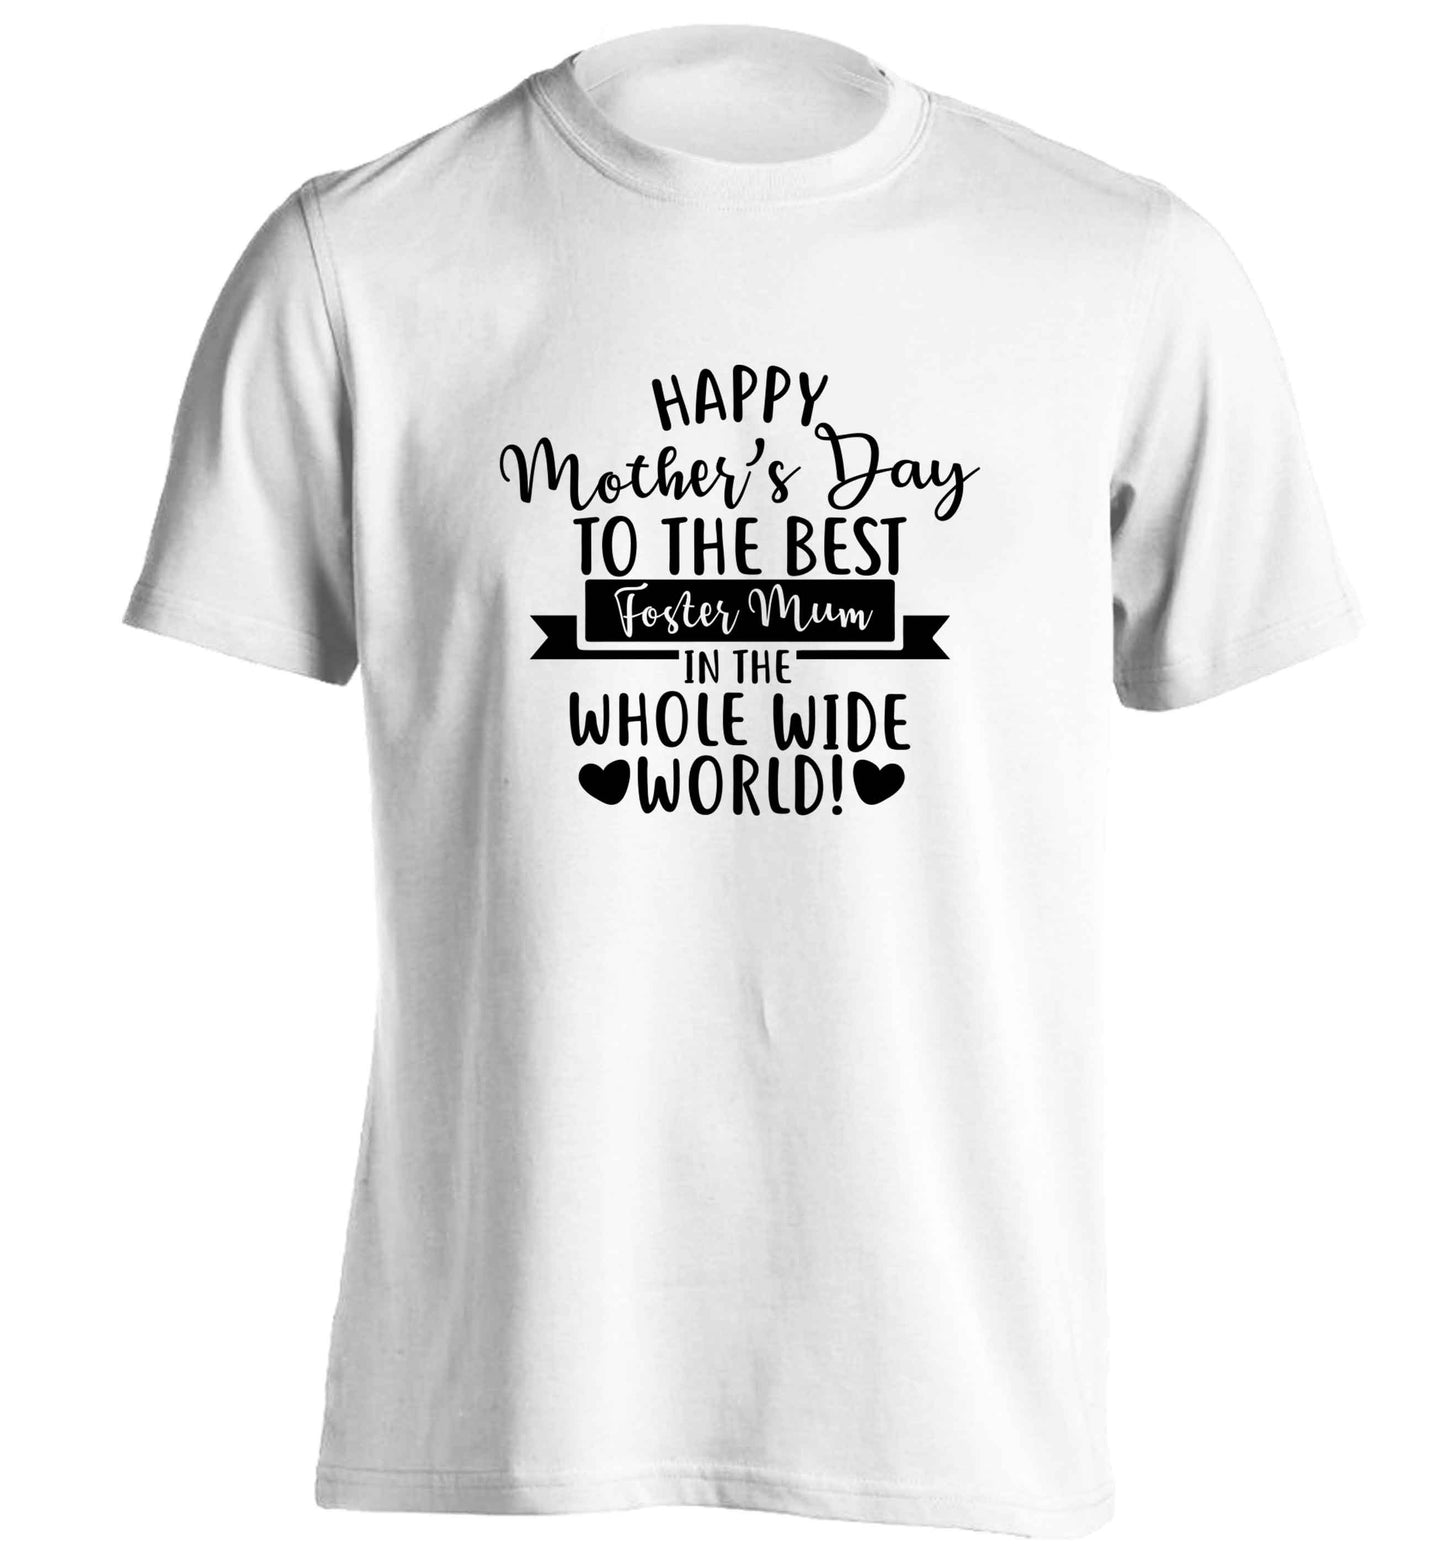 Happy mother's day to the best foster mum in the world adults unisex white Tshirt 2XL